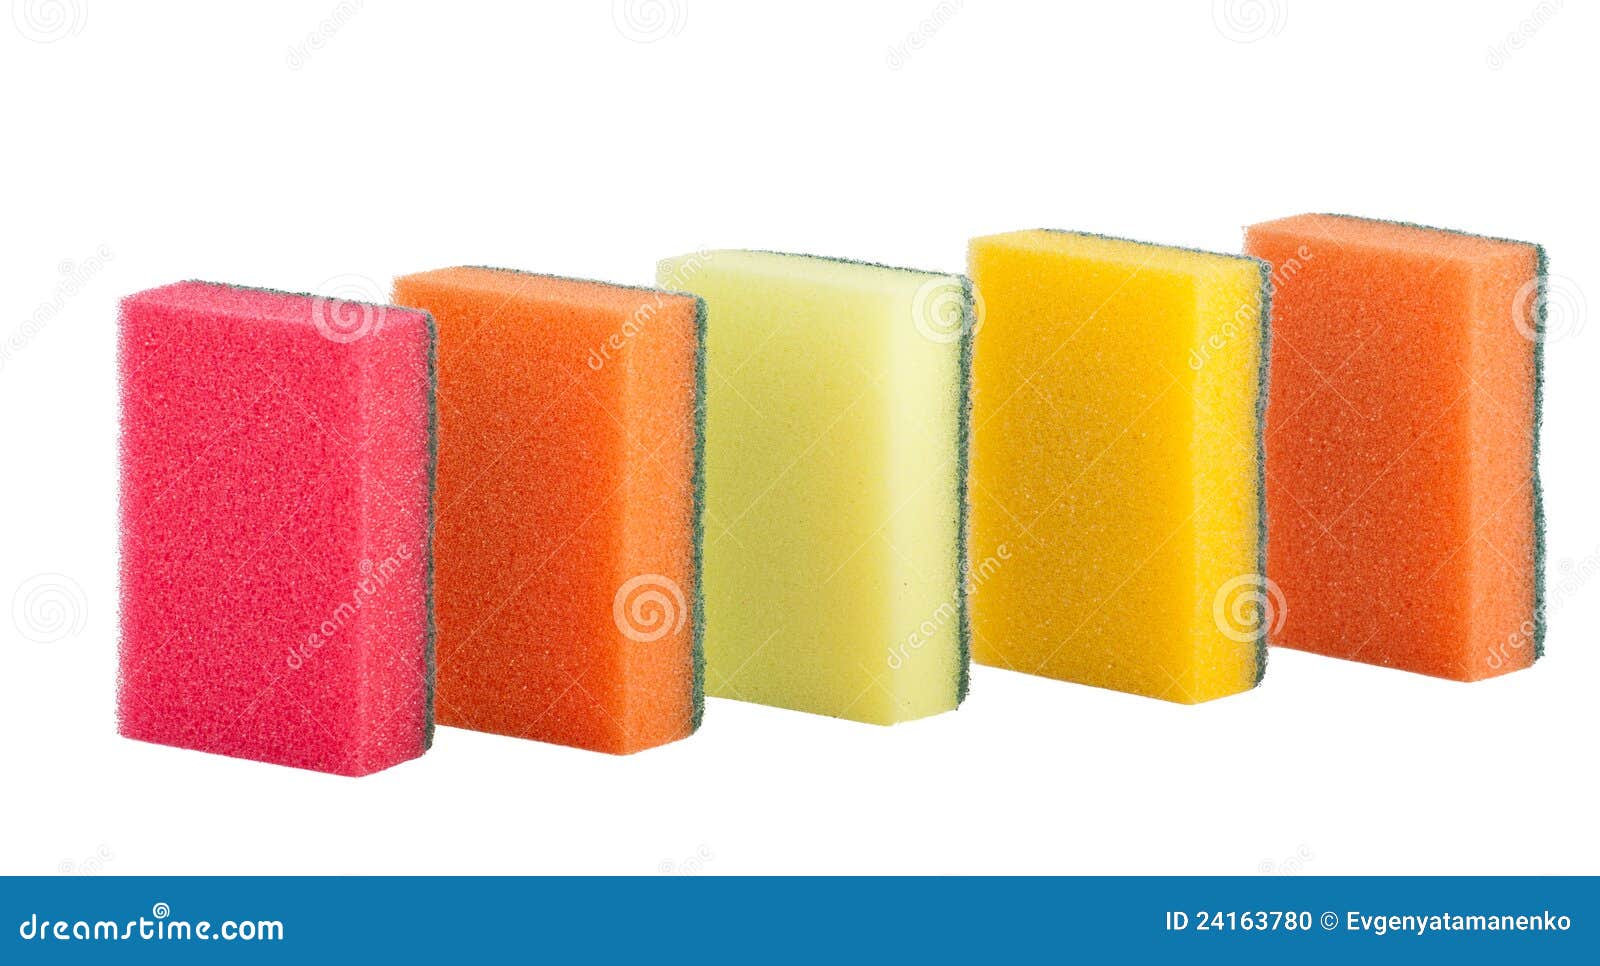 Set of five sponges to wash dishes, Stock image